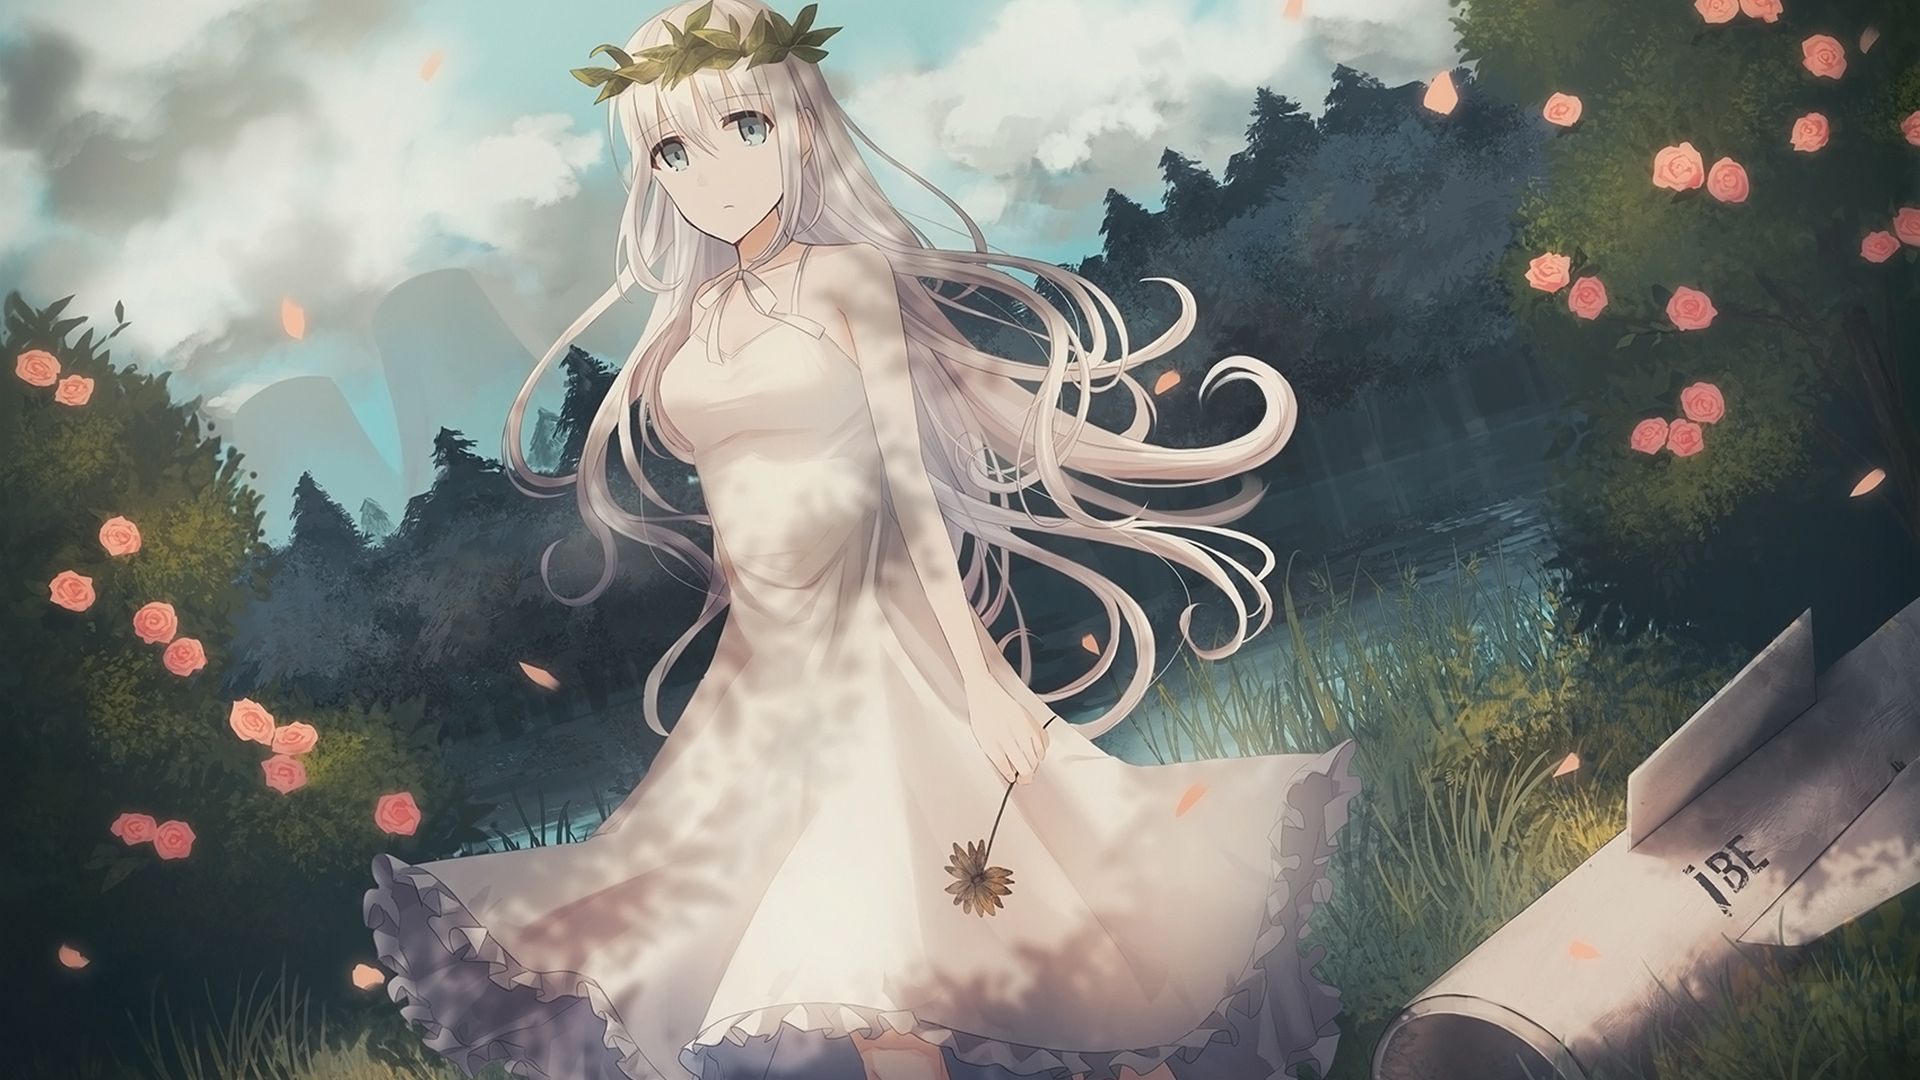 Desktop Wallpaper White Hairs, Anime Girl, Flower Crown, Outdoor, HD Image, Picture, Background, 04aa3c